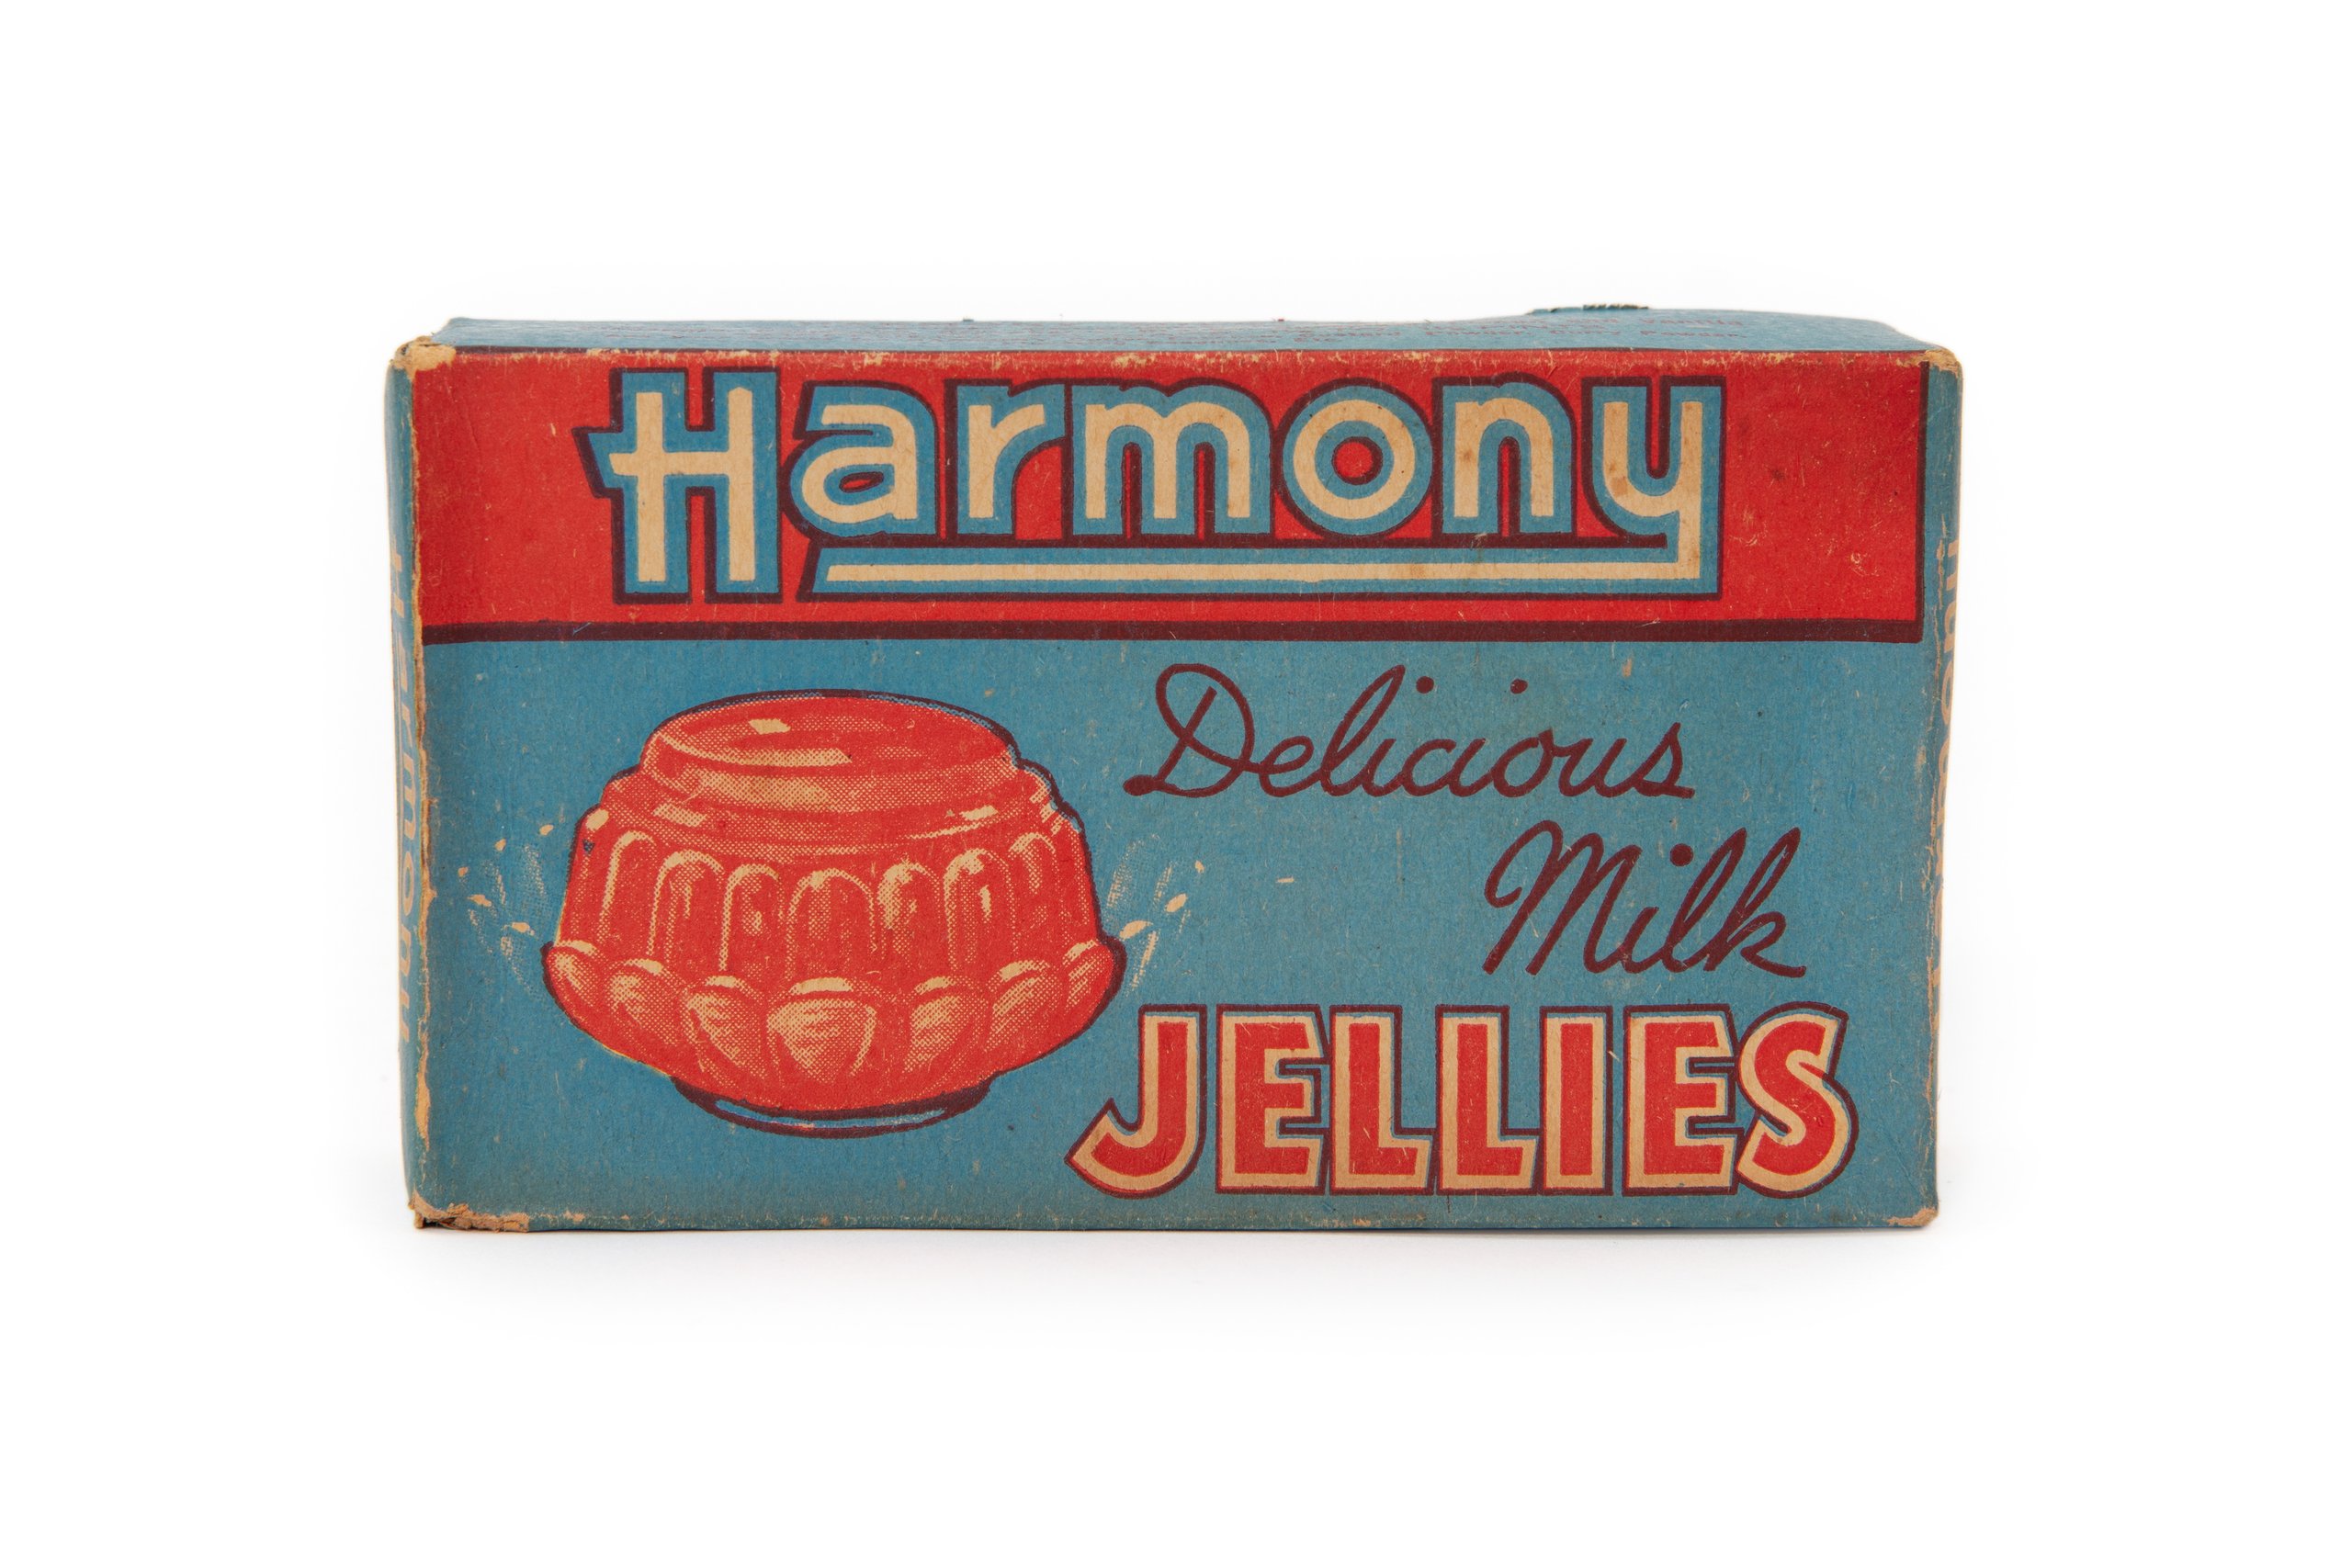 Package for 'Harmony Milk Jelly' pudding mix